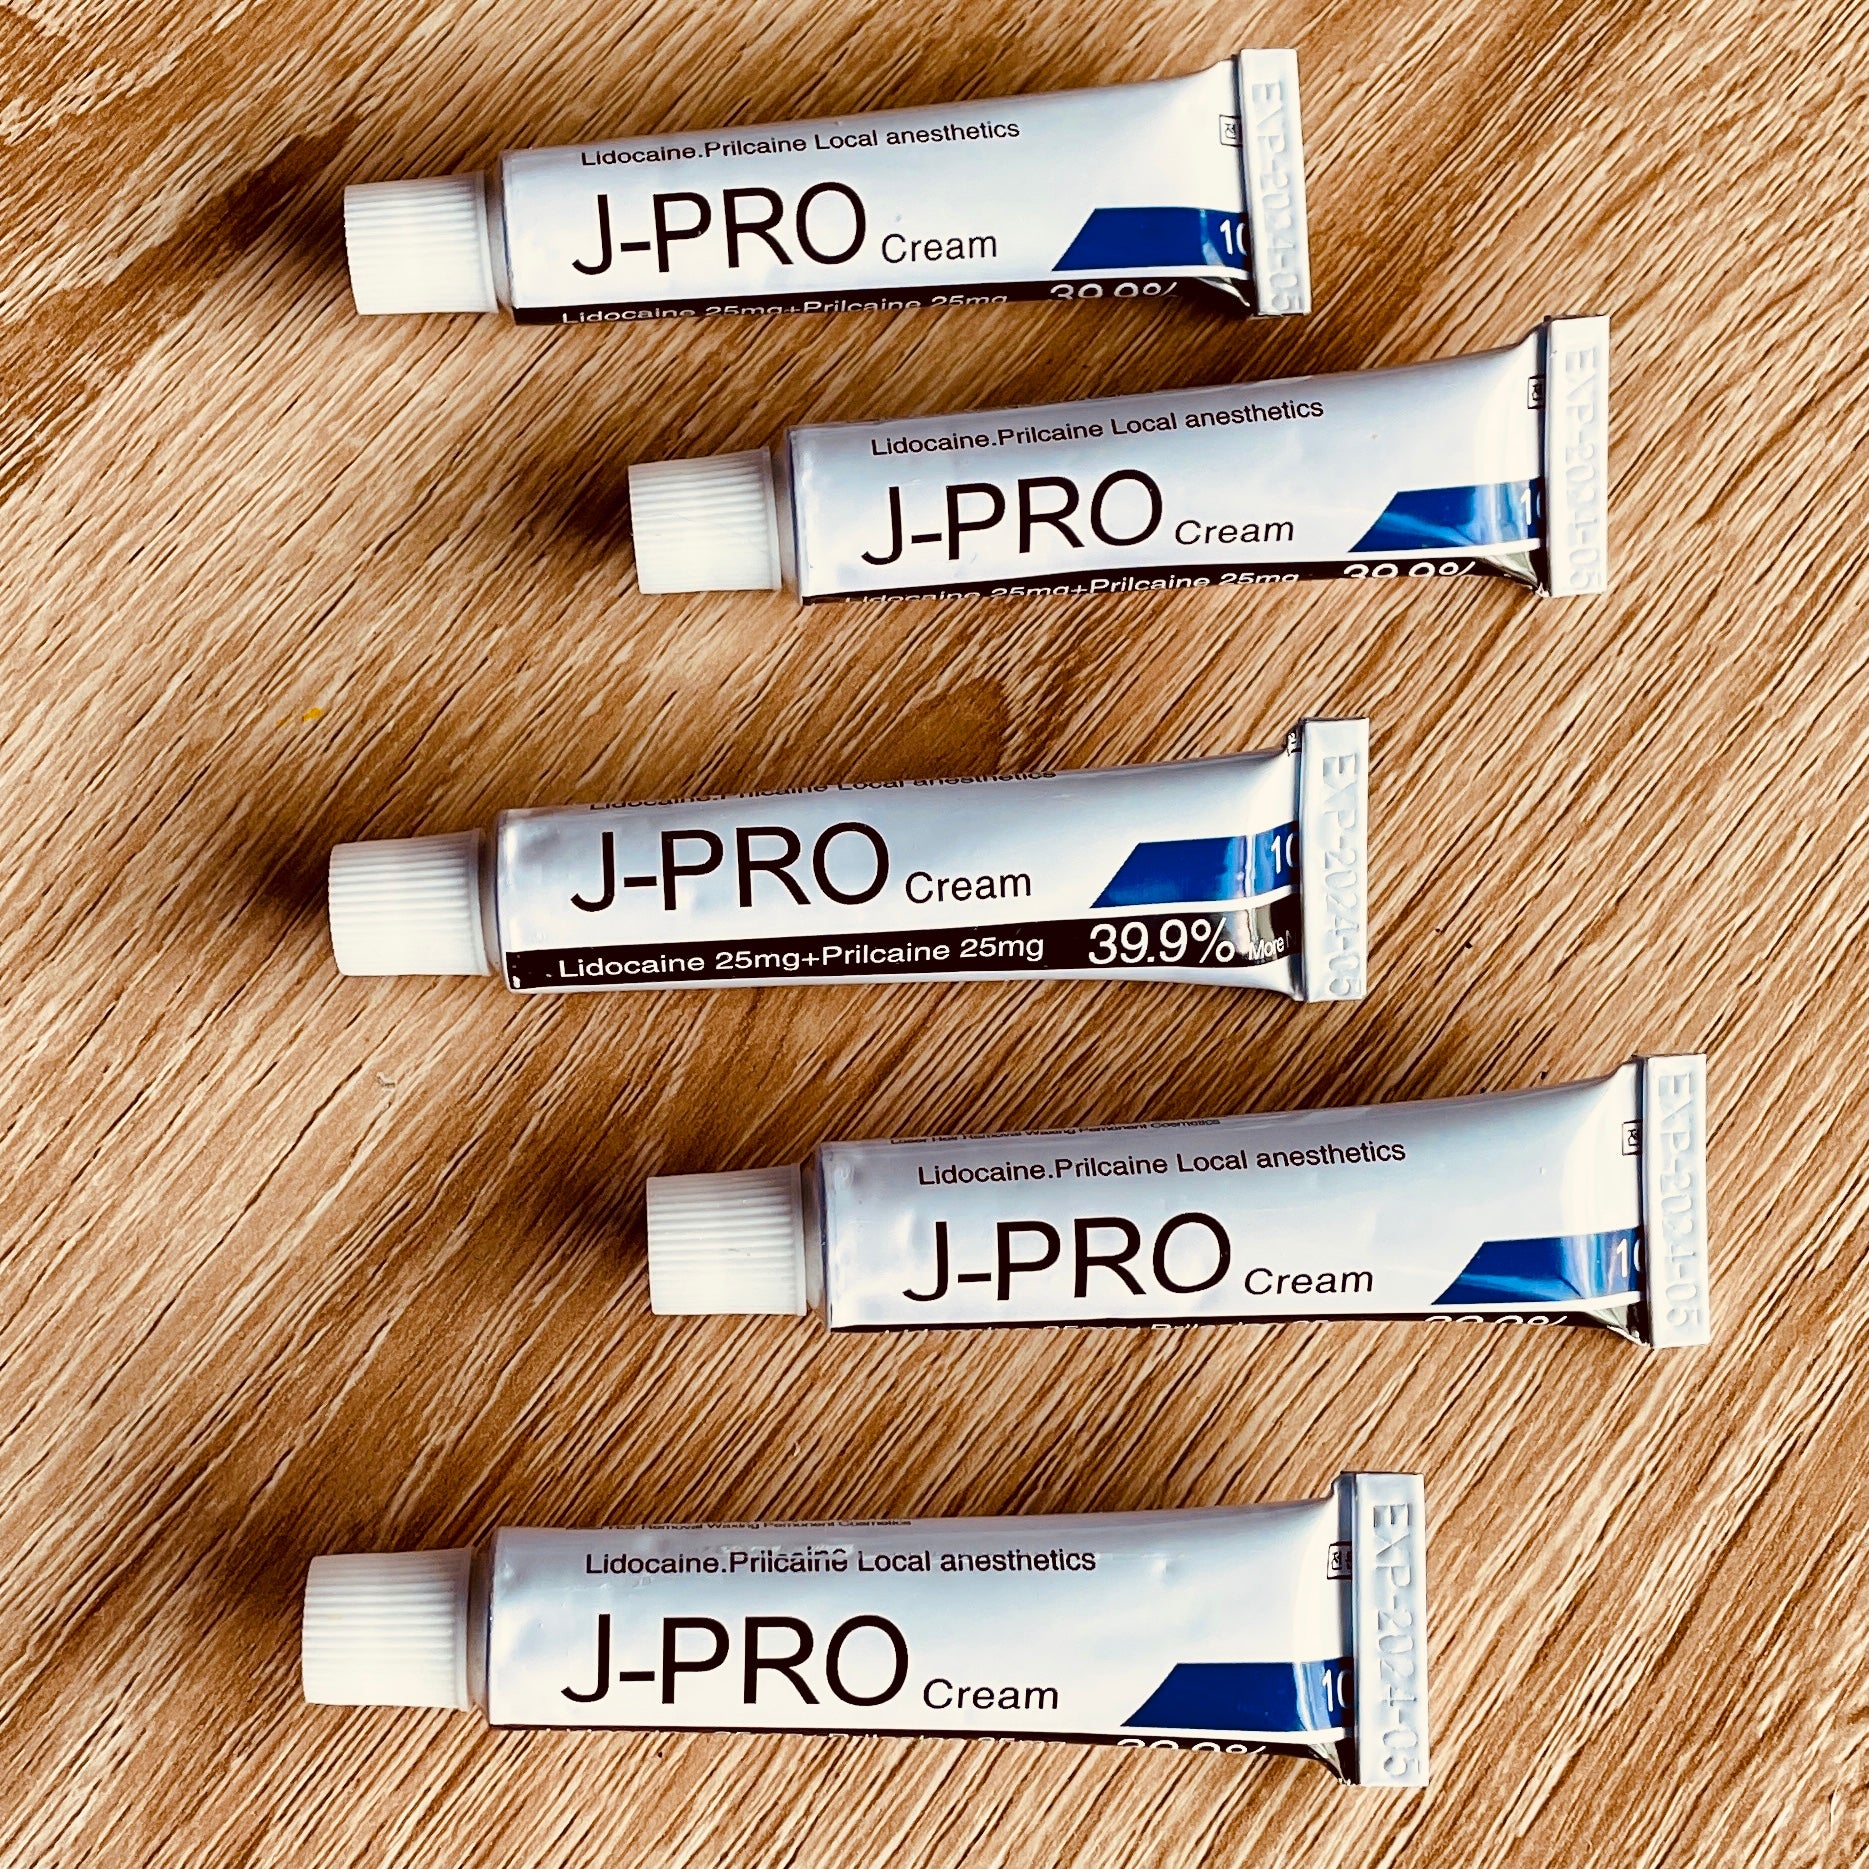 J-Pro Tattoo Anesthetic Numbing Cream For Tattooing, Microblading, & Permanent Makeup